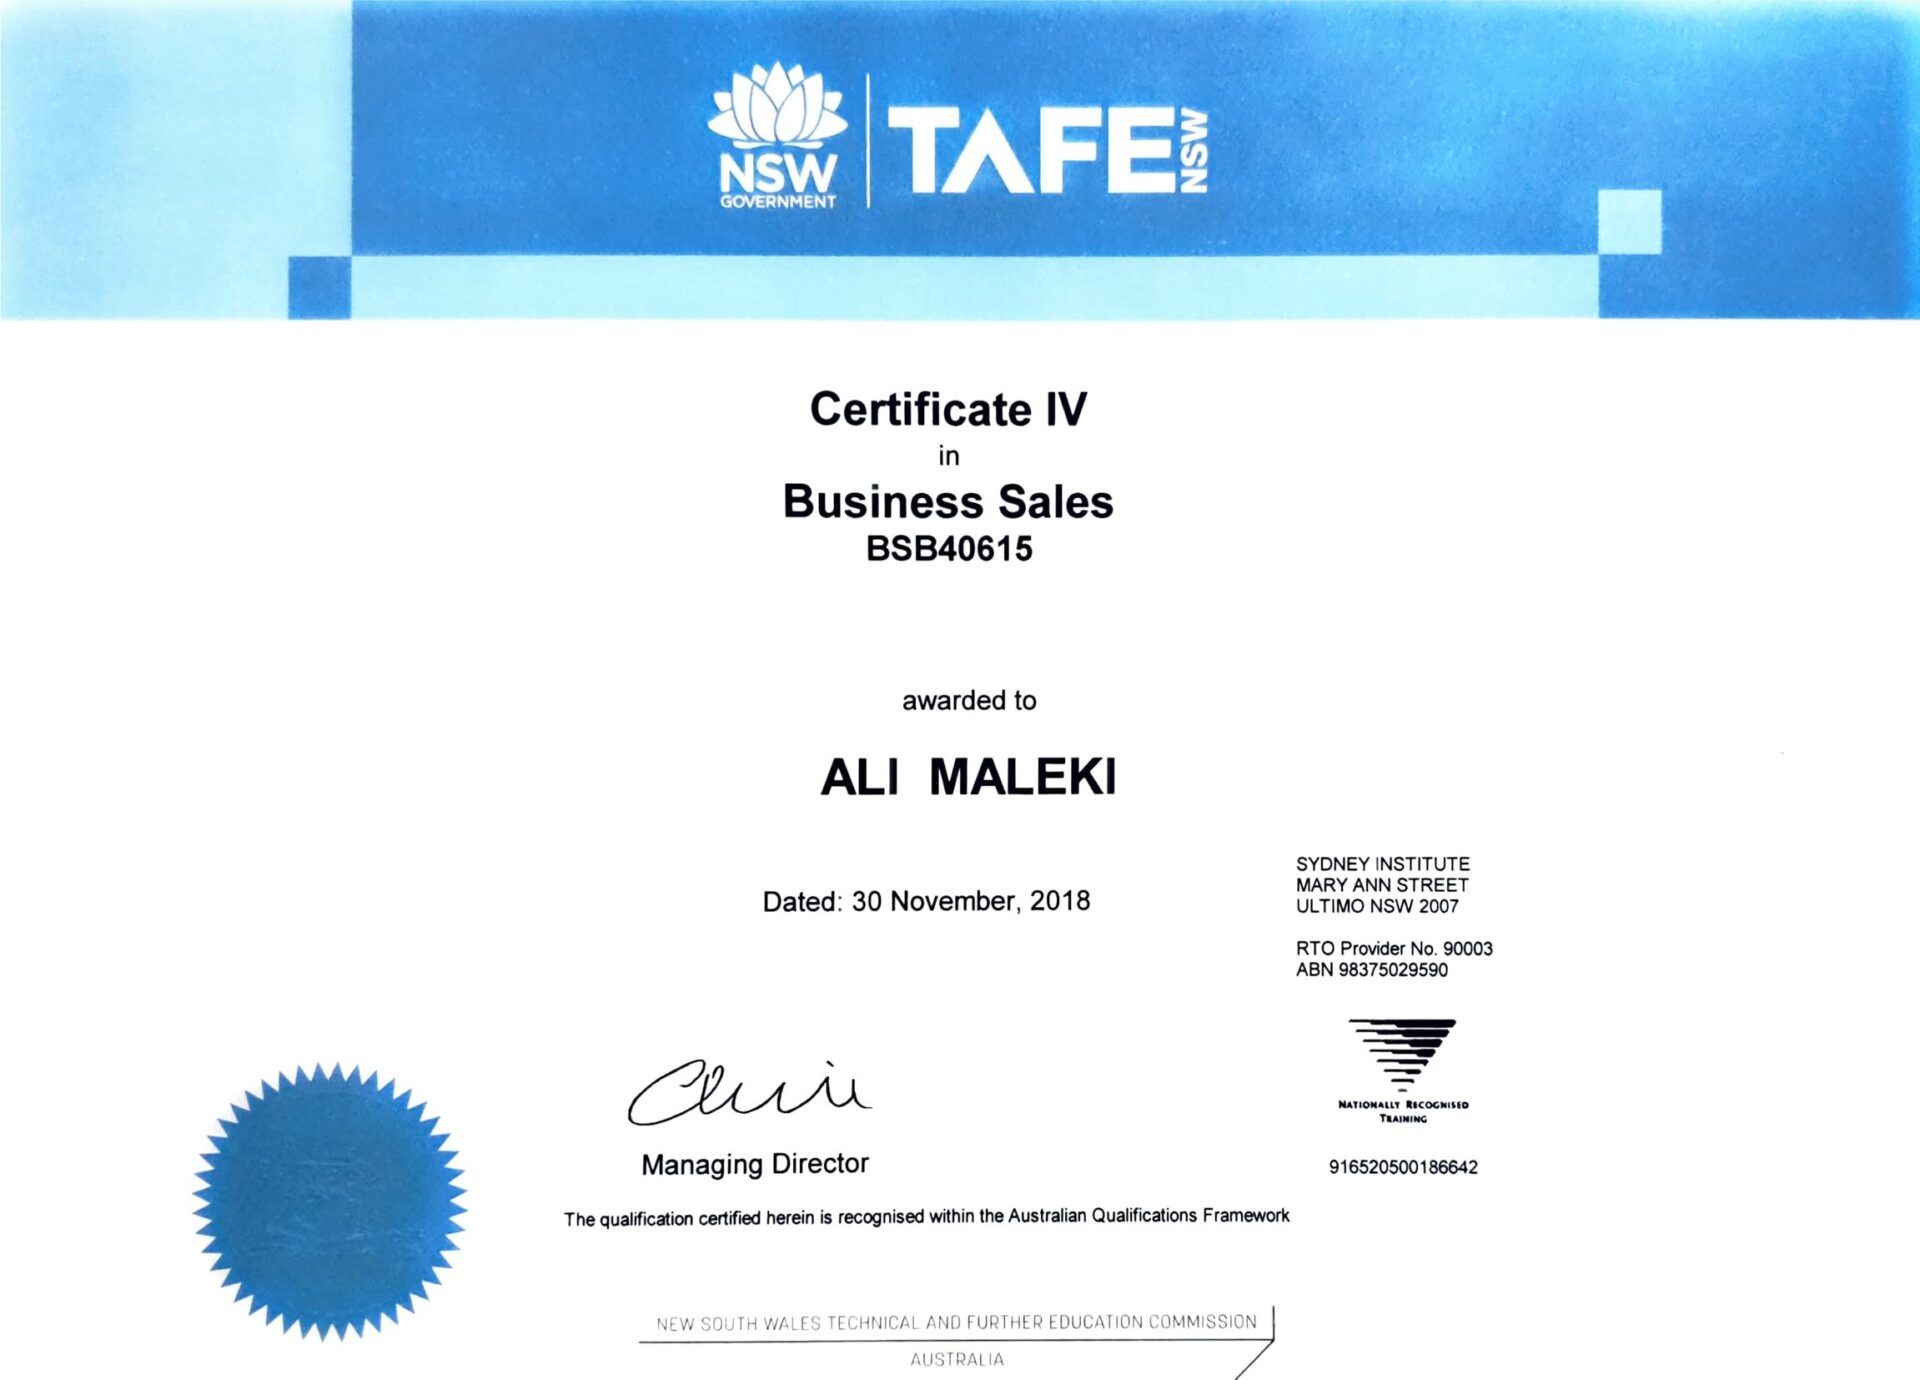 Certificate IV in business sales